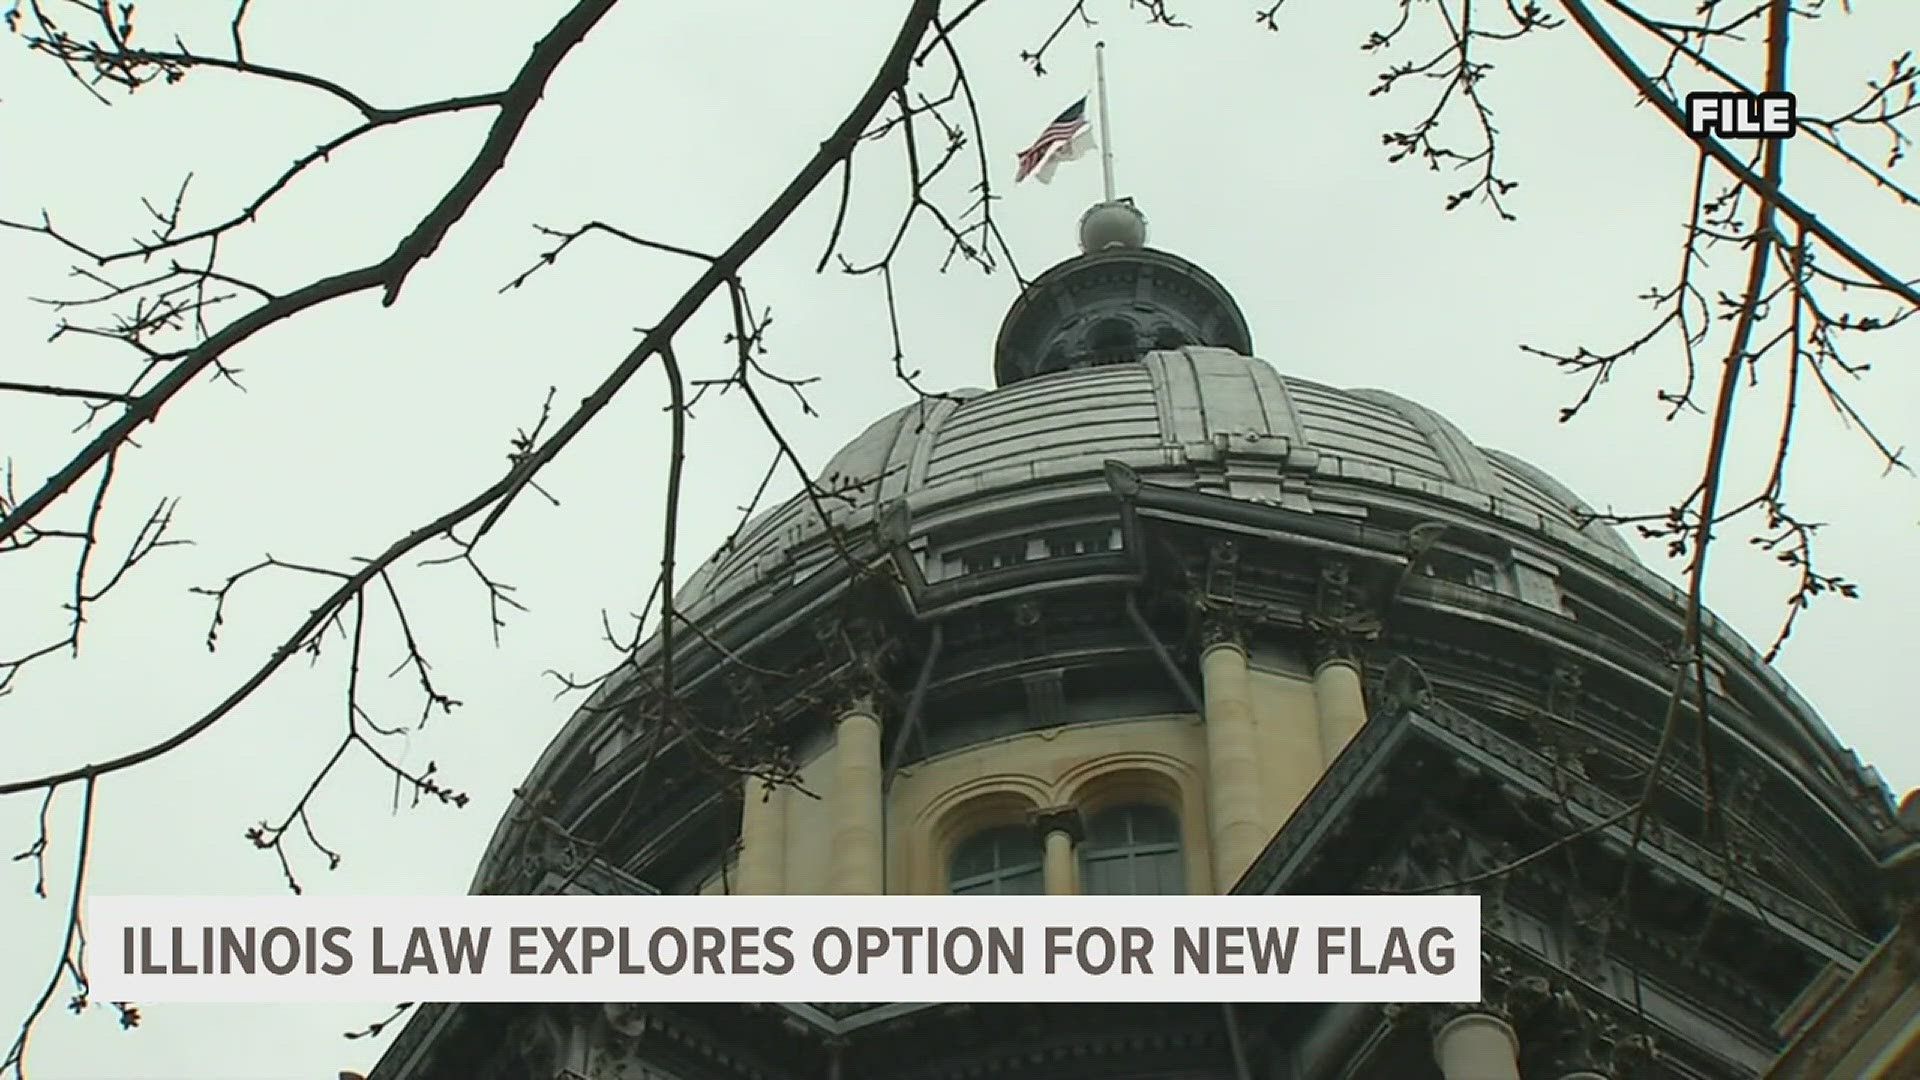 Gov. J.B. Pritzker signed a bill exploring the creation of a new state flag. The goal is to replace the current flag by September of next year.